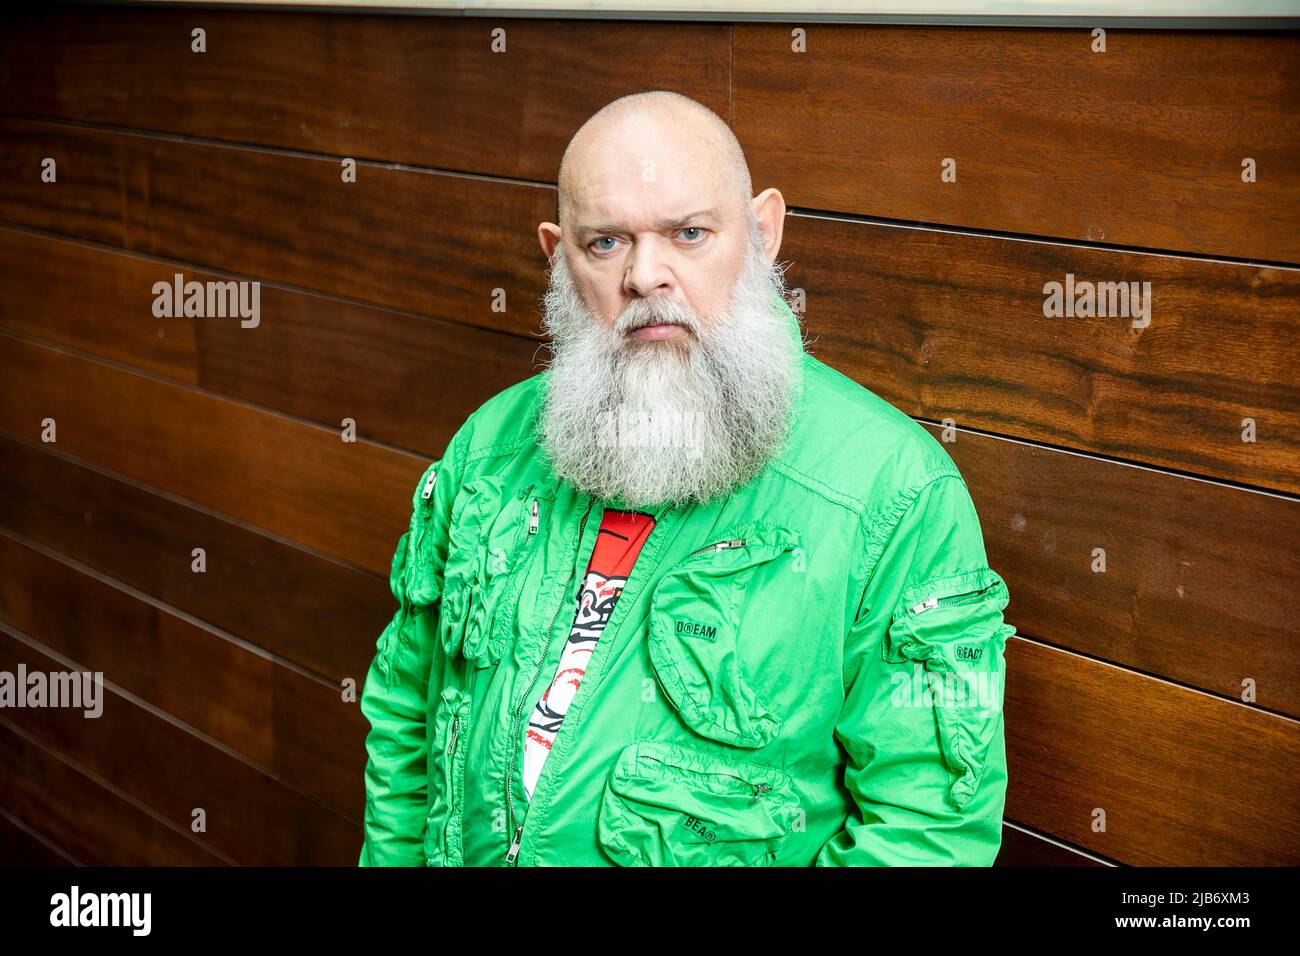 Photo 2 of 6 in Walter van Beirendonck Brings His Fantastical World to IKEA  - Dwell